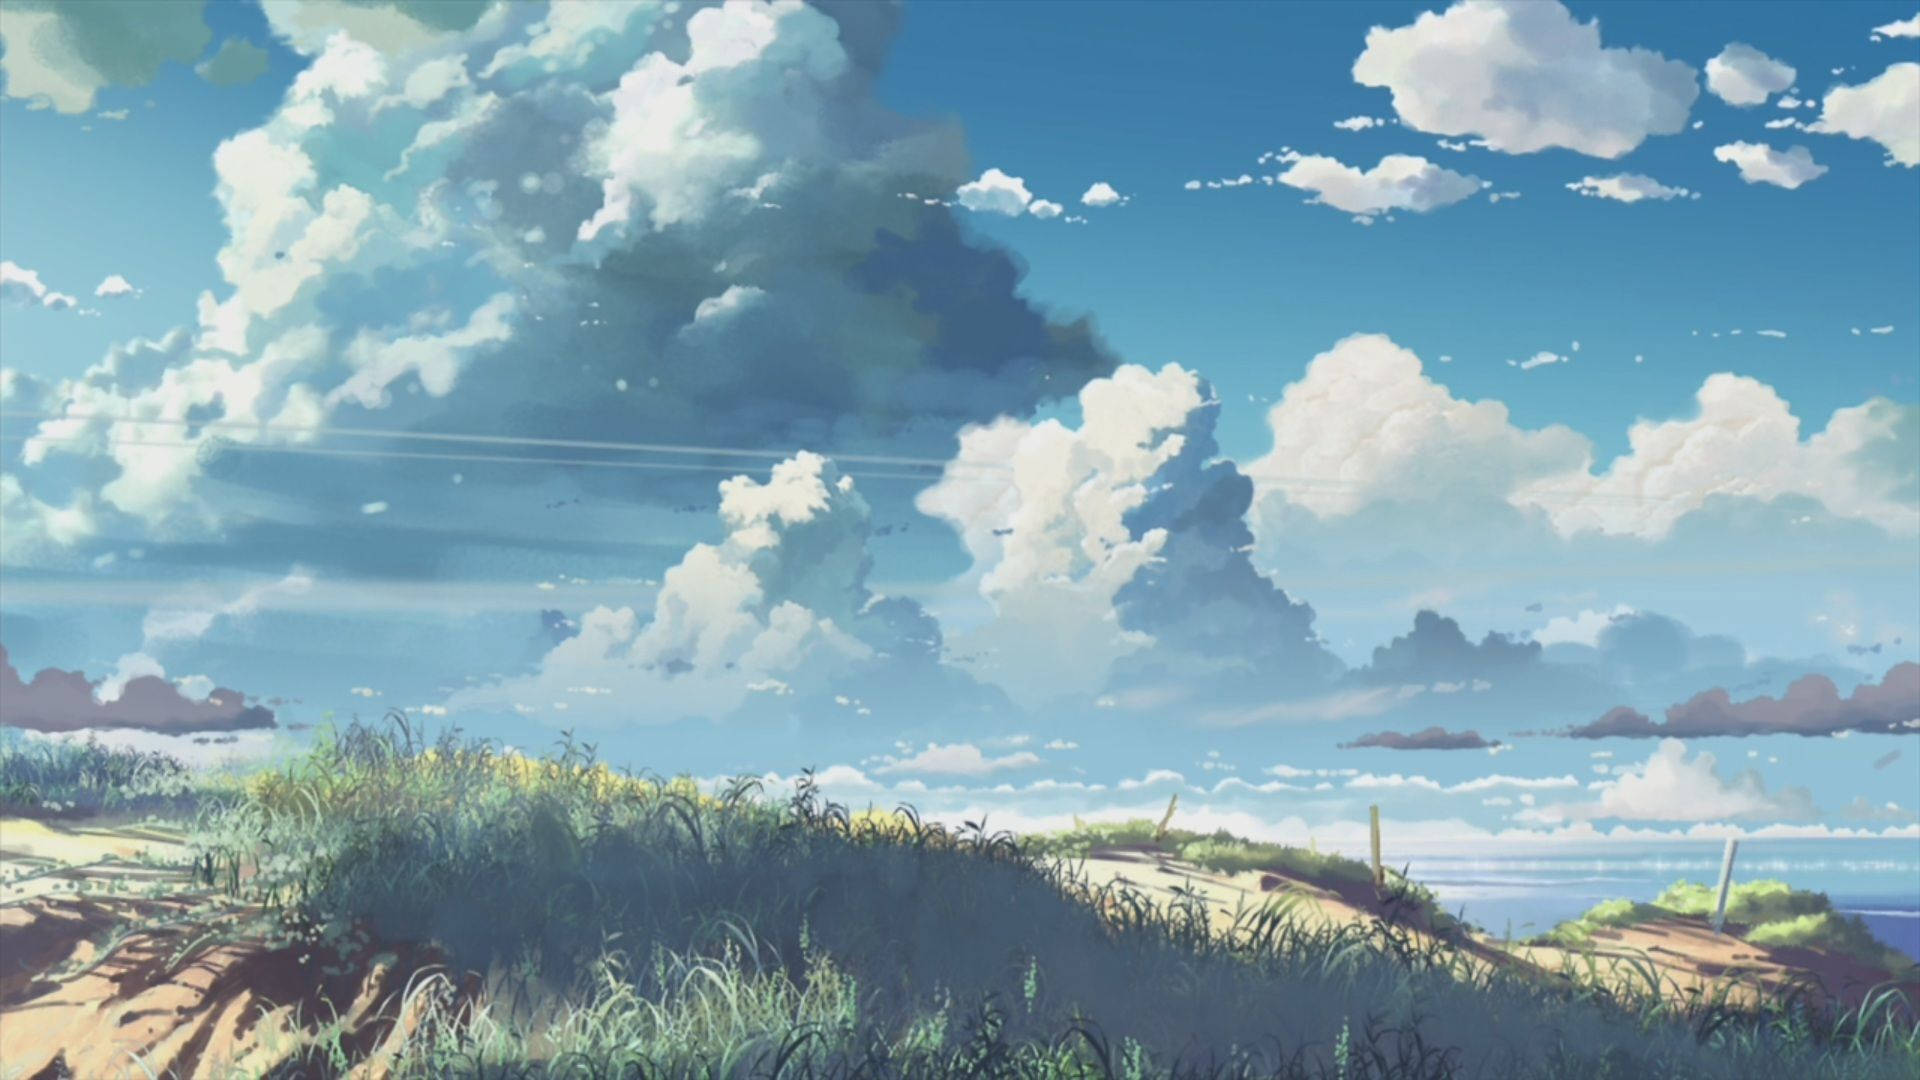 Top 999+ Anime Landscape Wallpaper Full HD, 4K✅Free to Use